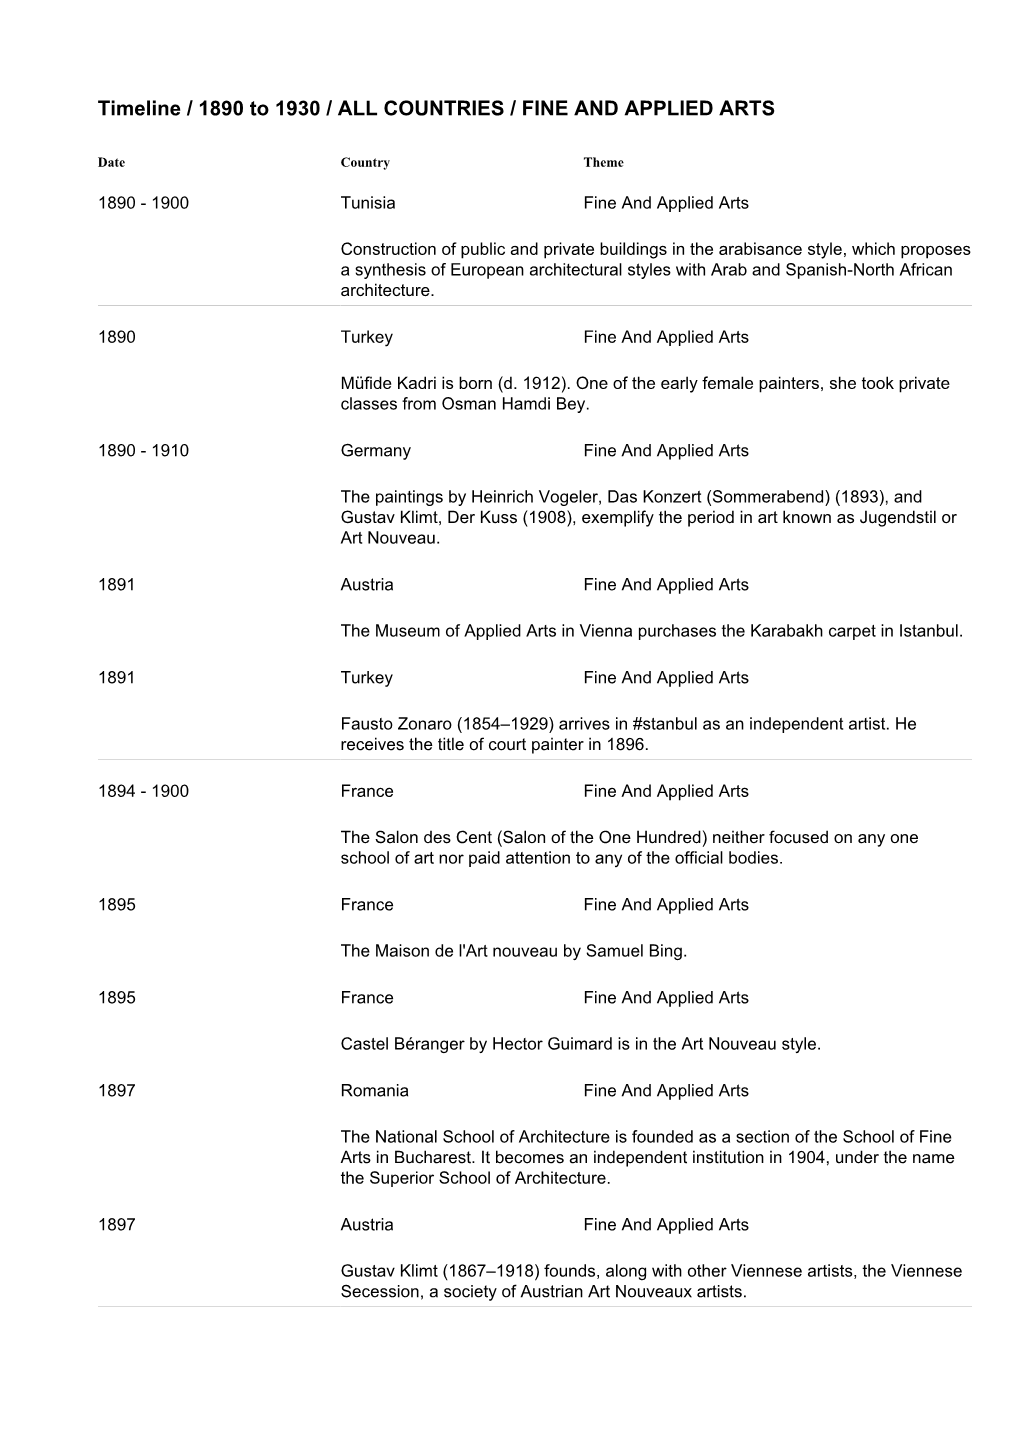 Timeline / 1890 to 1930 / ALL COUNTRIES / FINE and APPLIED ARTS